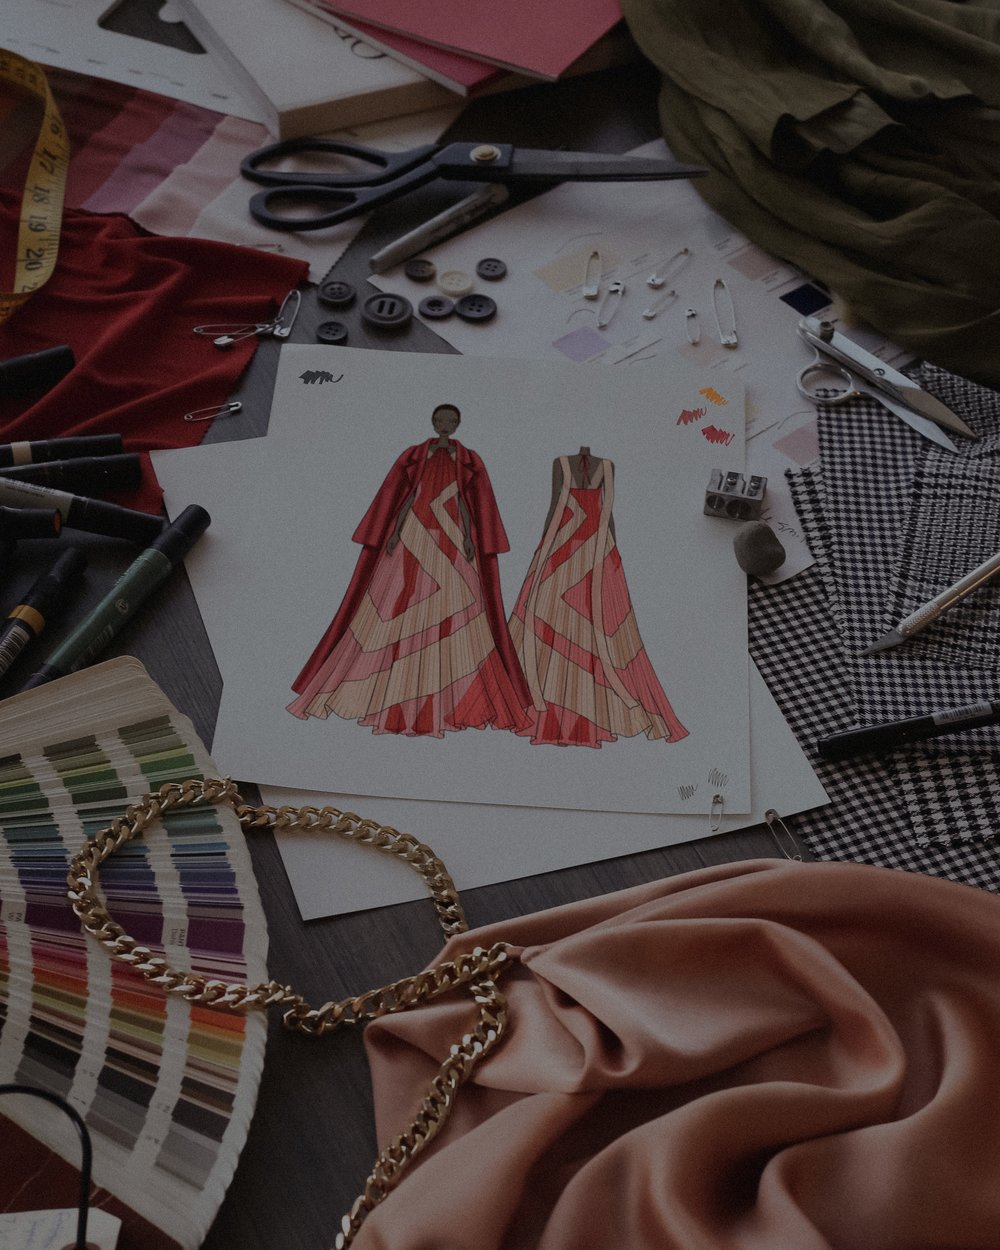 desktop with fashion sketch of woman in red maxi dress